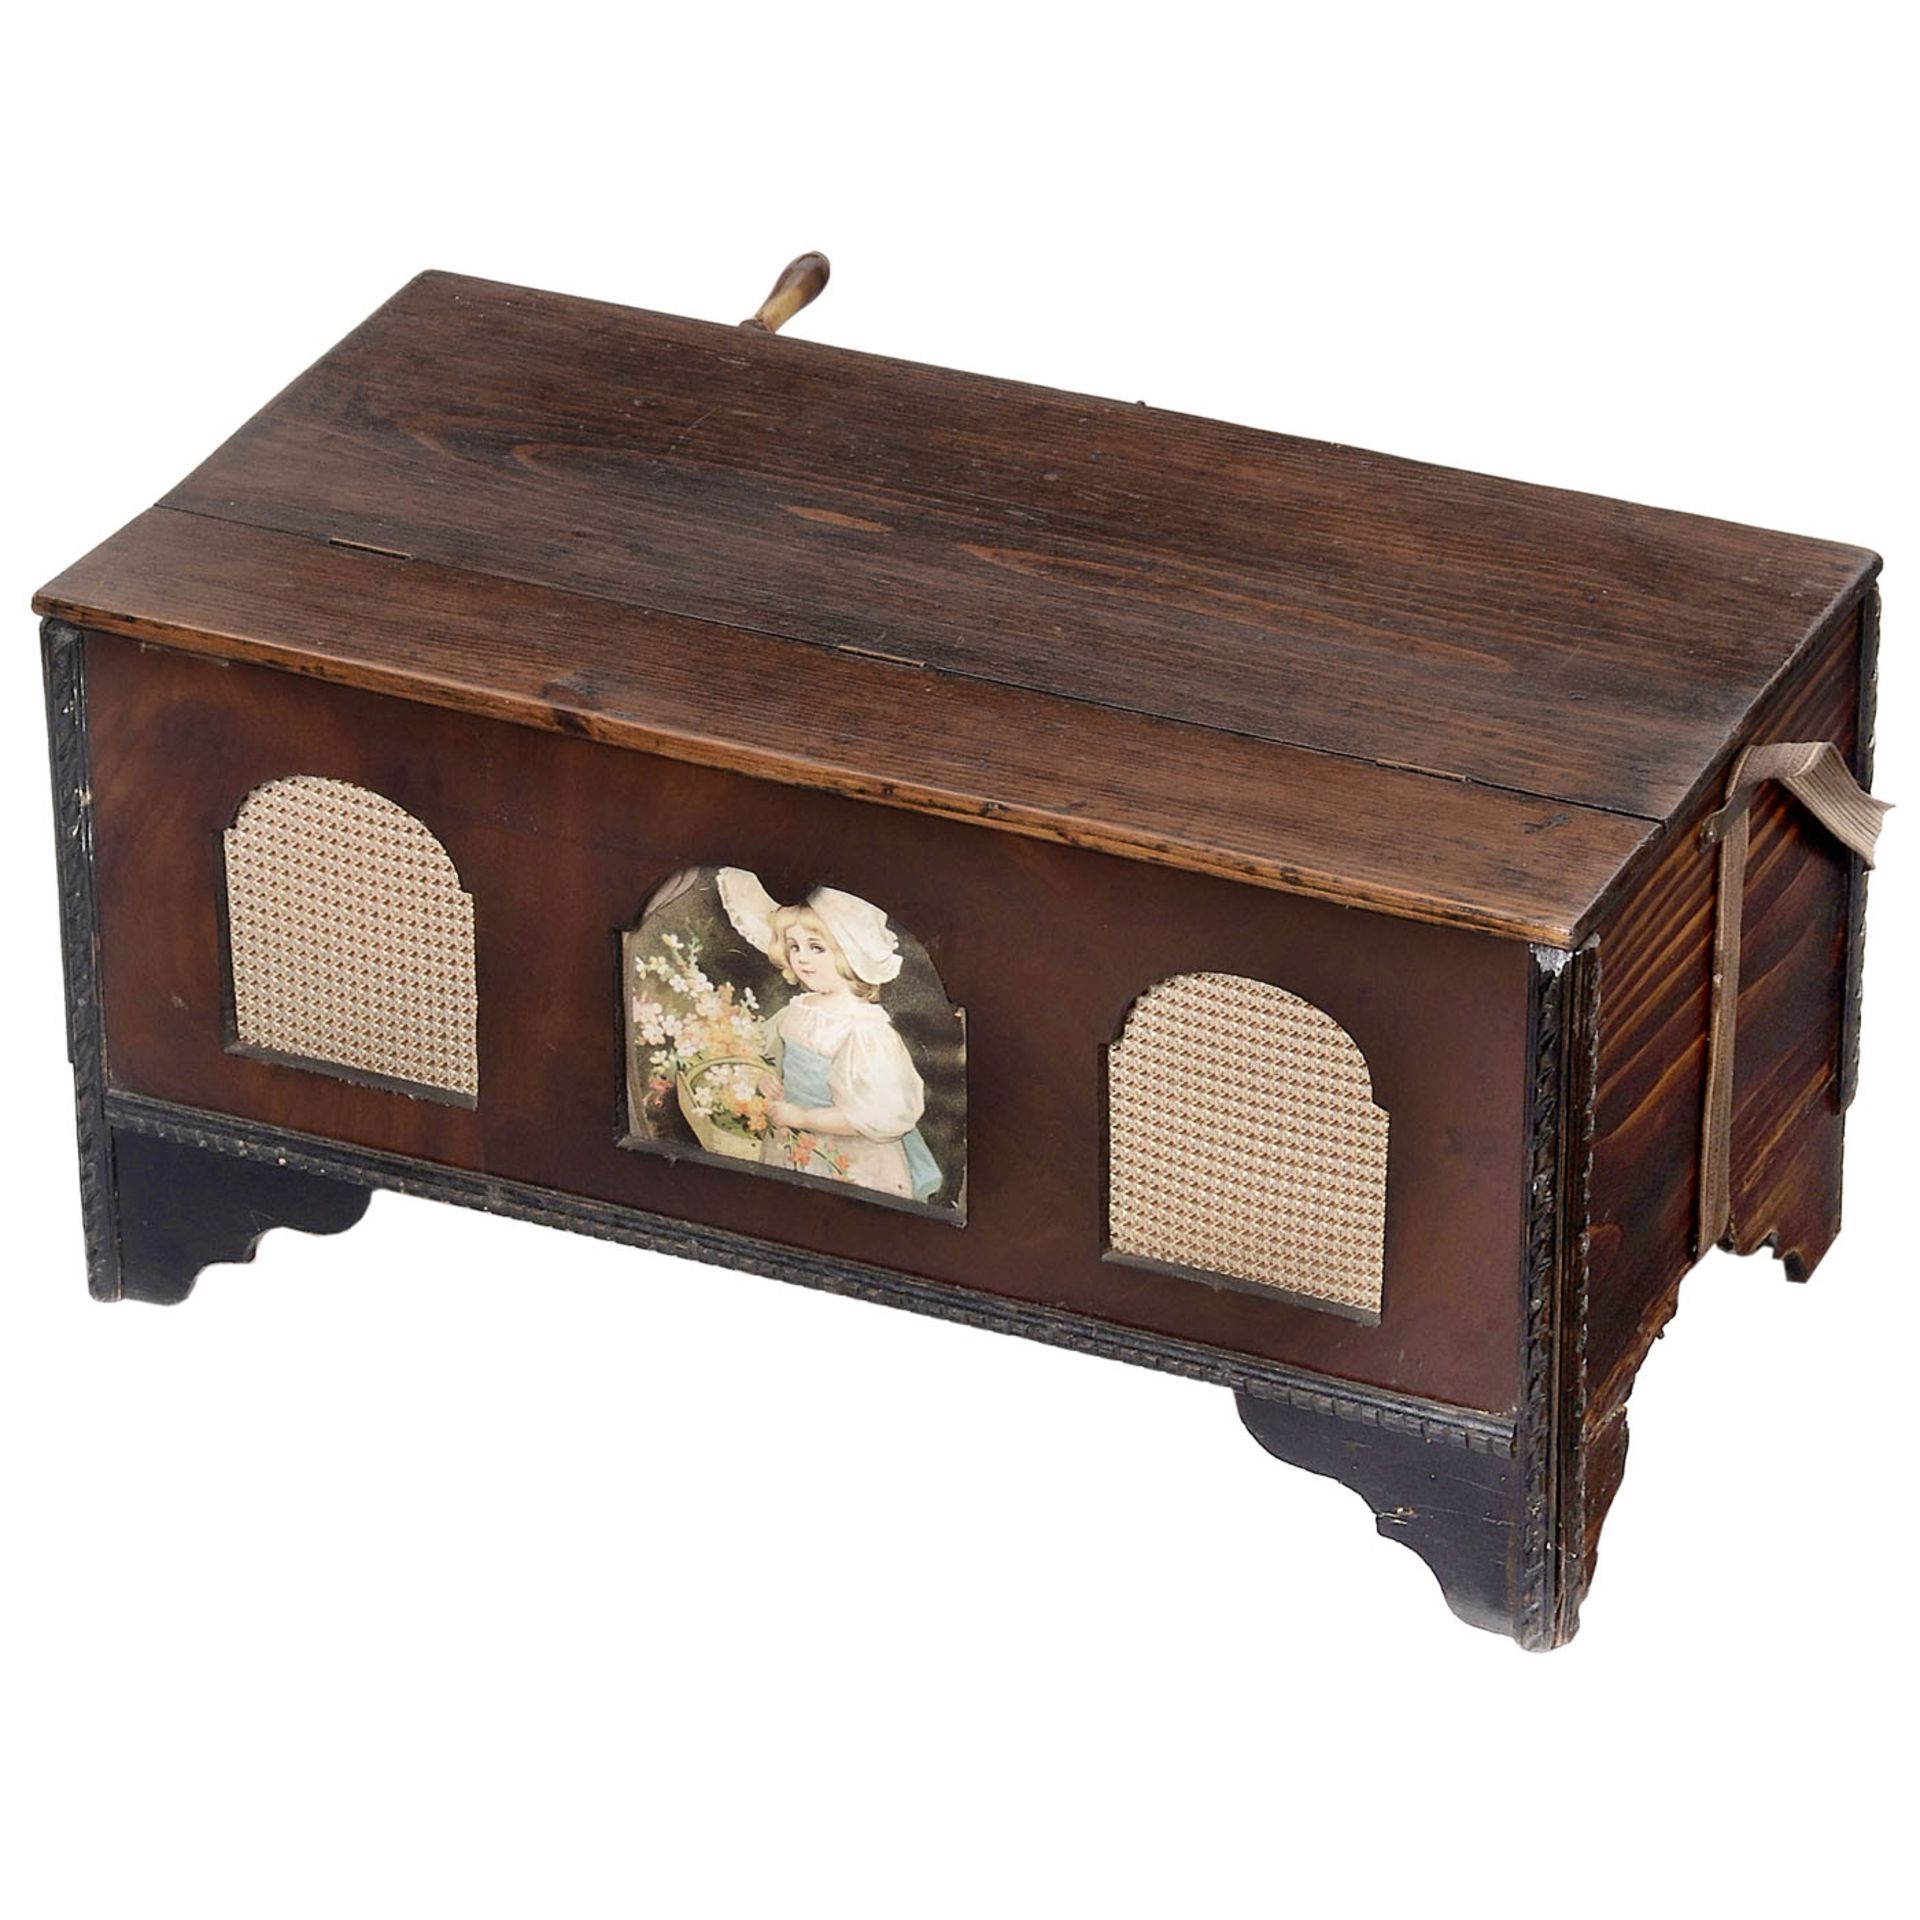 3 Disc Musical Box, c. 1900 - Image 6 of 7